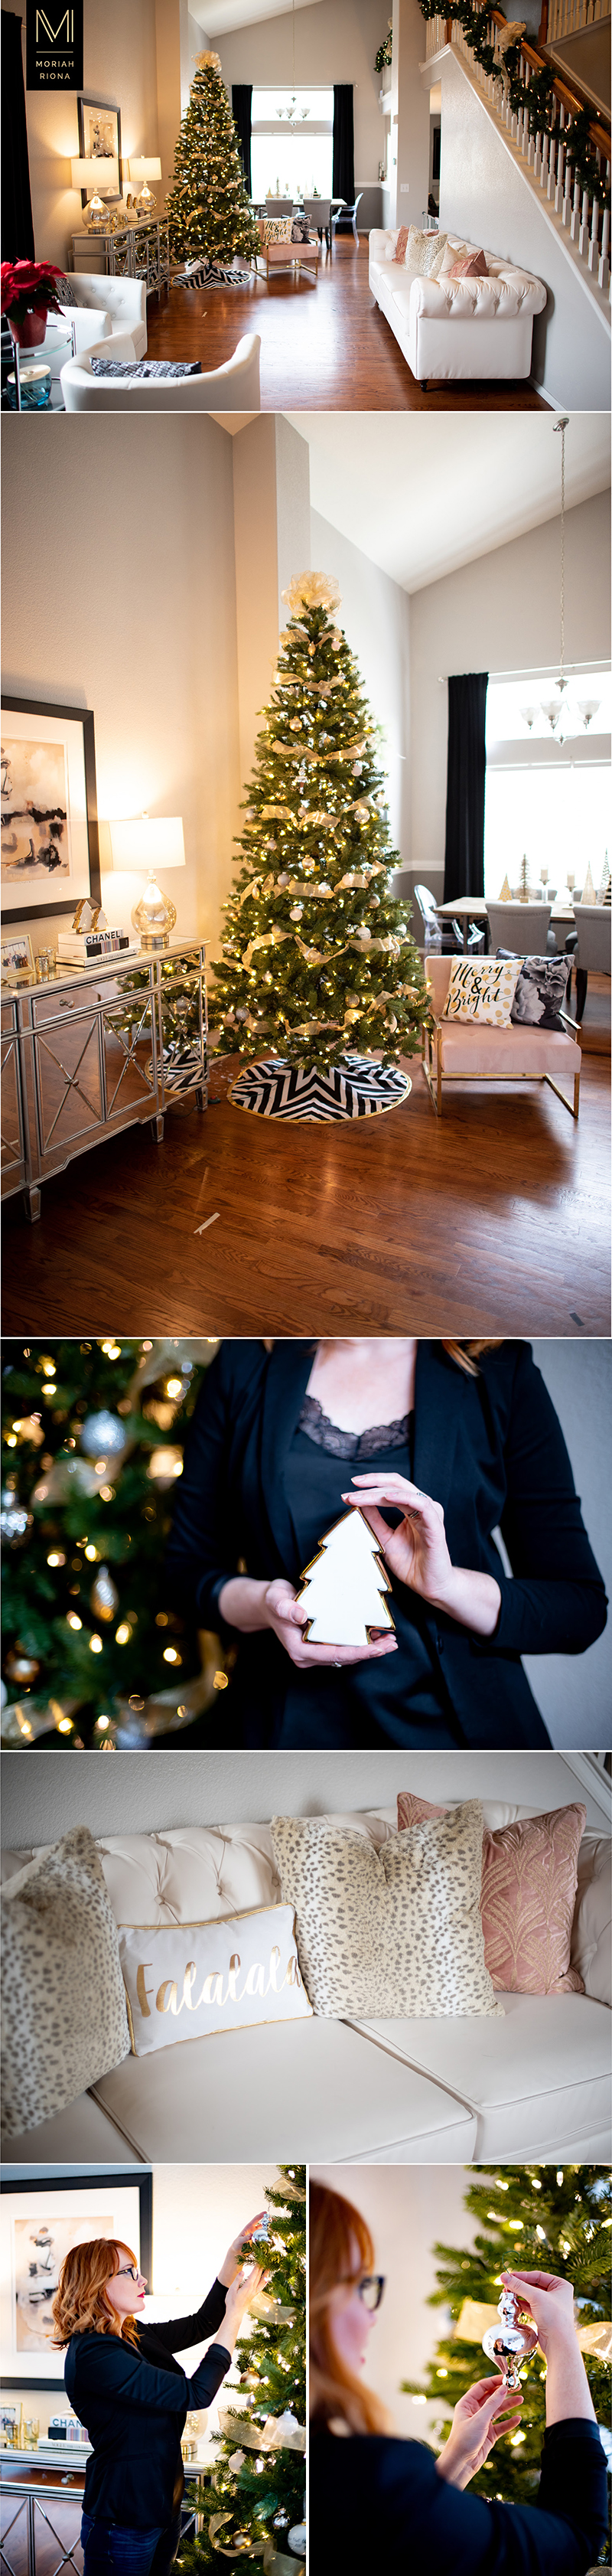 This is why I incorporated my Brand Colors into my holiday home decor! Check out this post to learn why it's so important to establish your own brand colors in your visual branding. For photographers and creative female entrepreneurs. Glam holiday and Christmas decor and tree. #entrepreneur #marketing #christmas #christmastree #gold #black